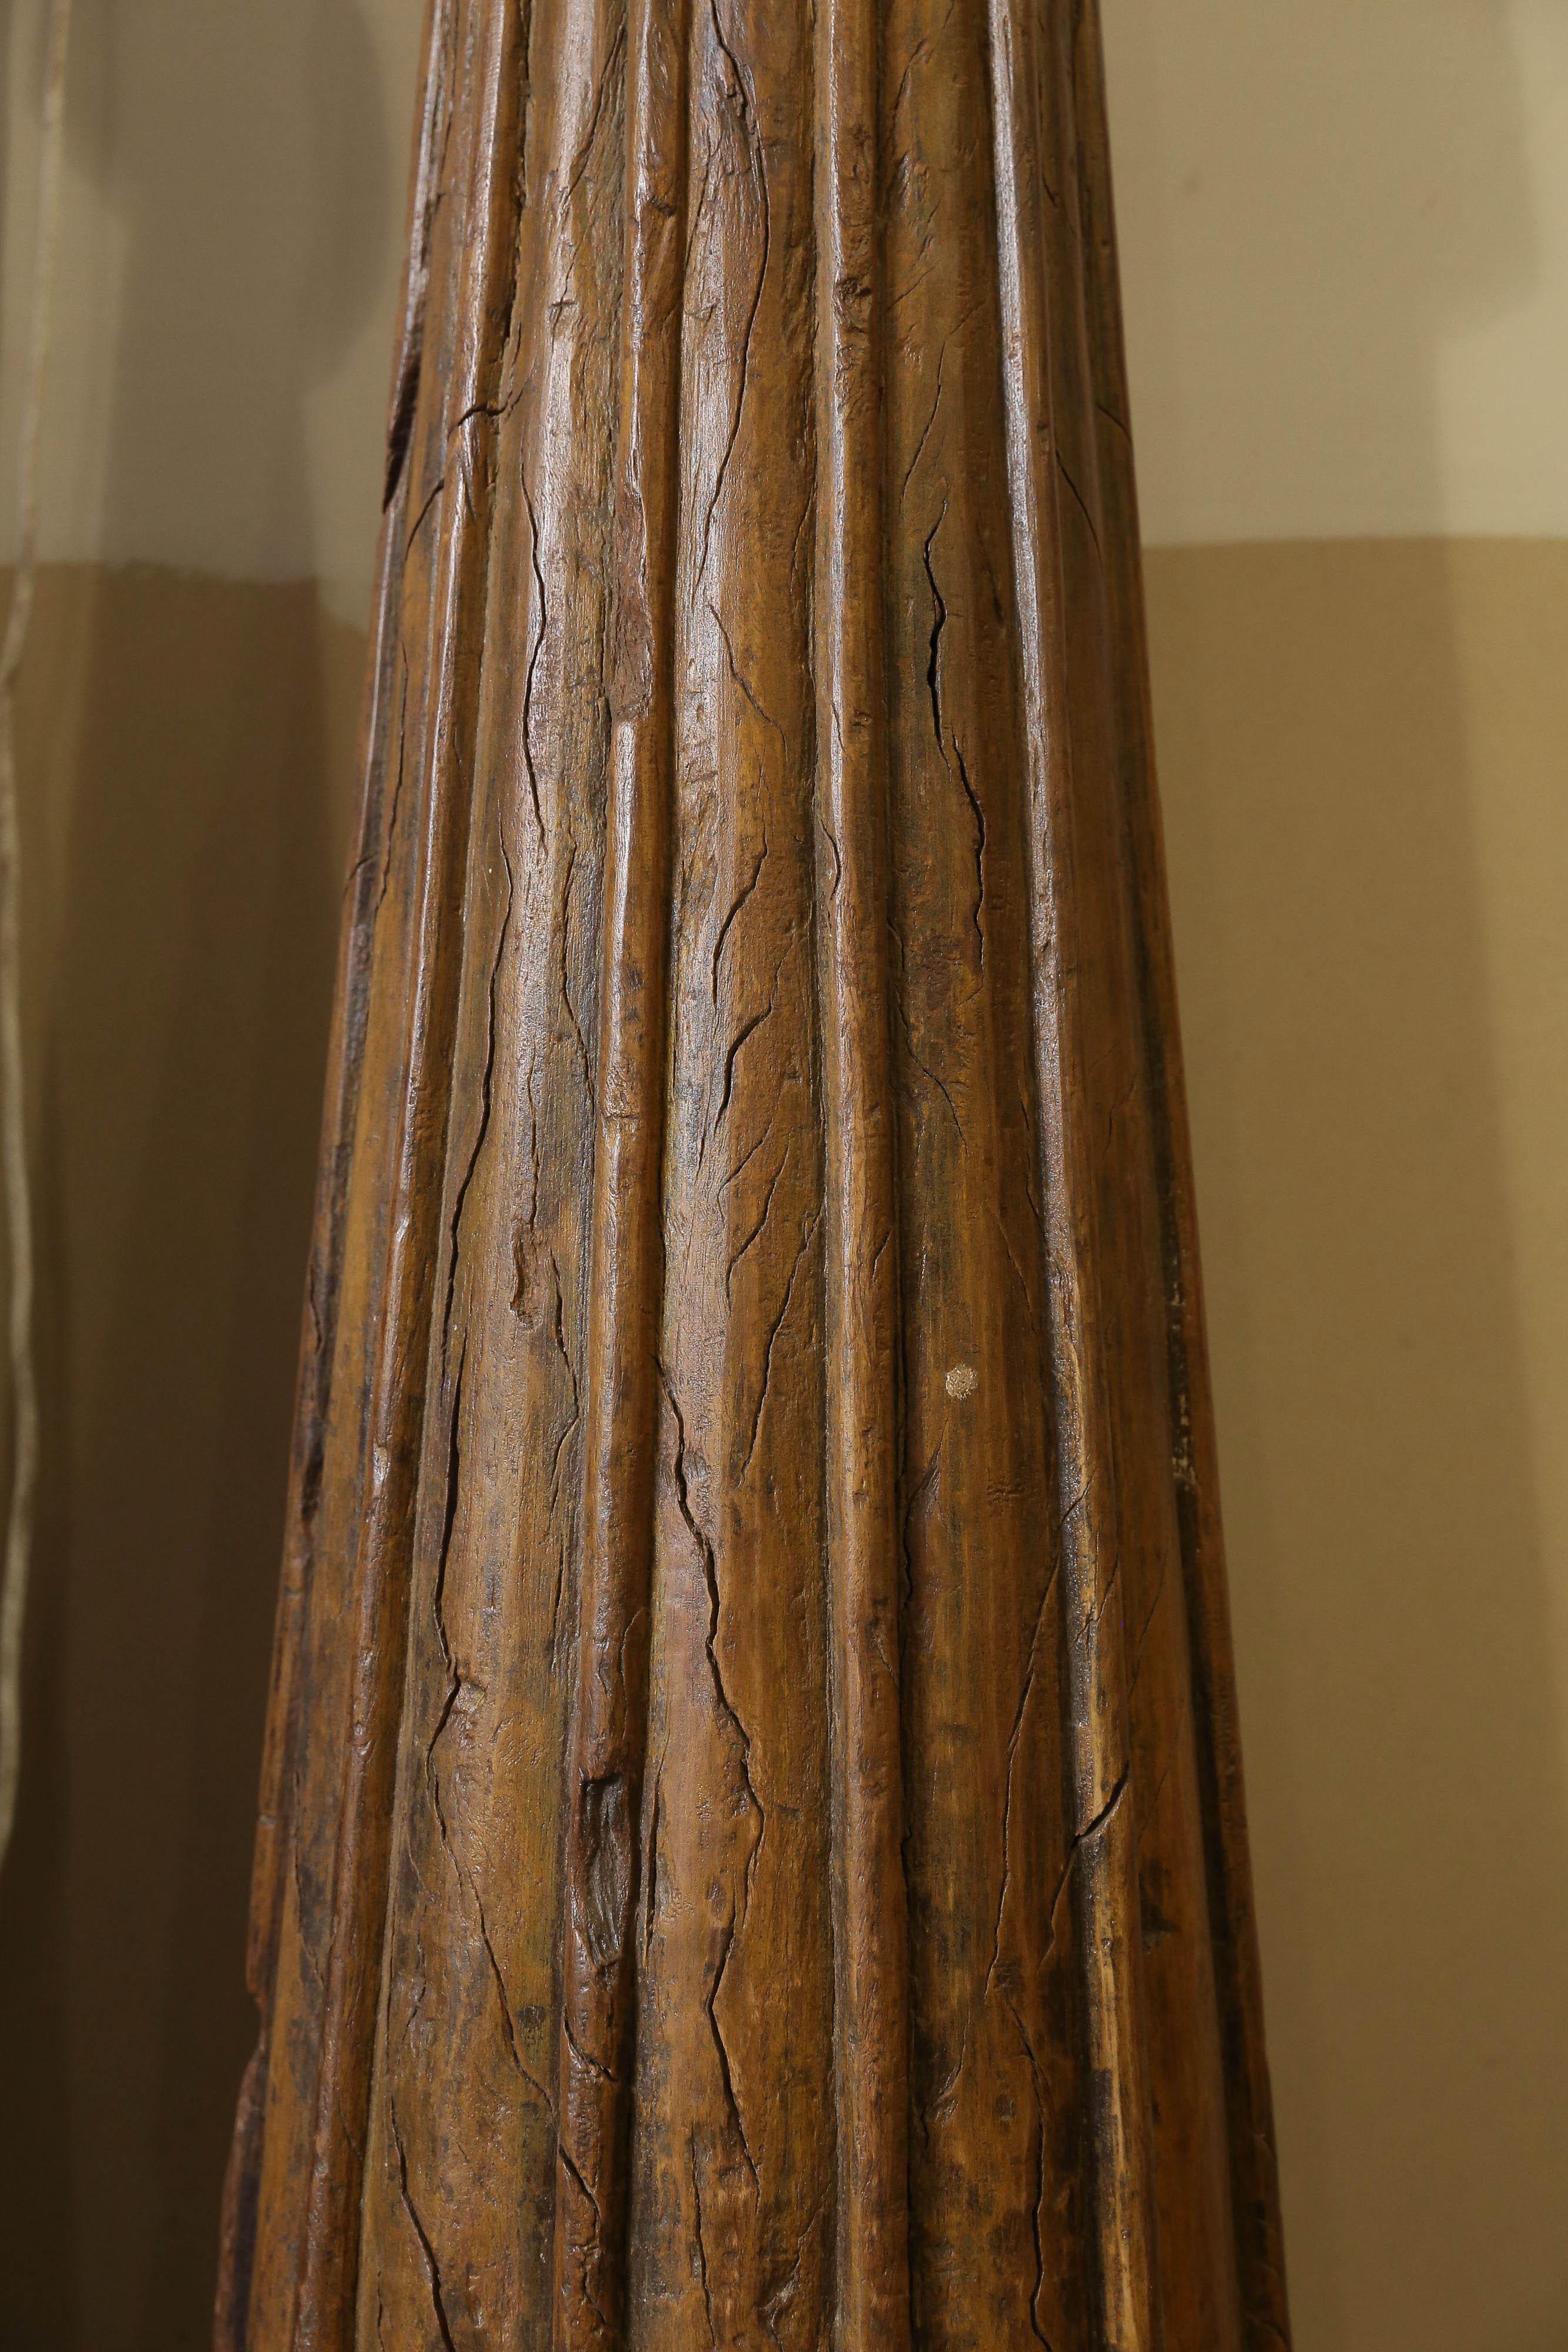 Indian 19th Century Solid Teak Wood Indoor Shaped Columns from Chettinad in South India For Sale